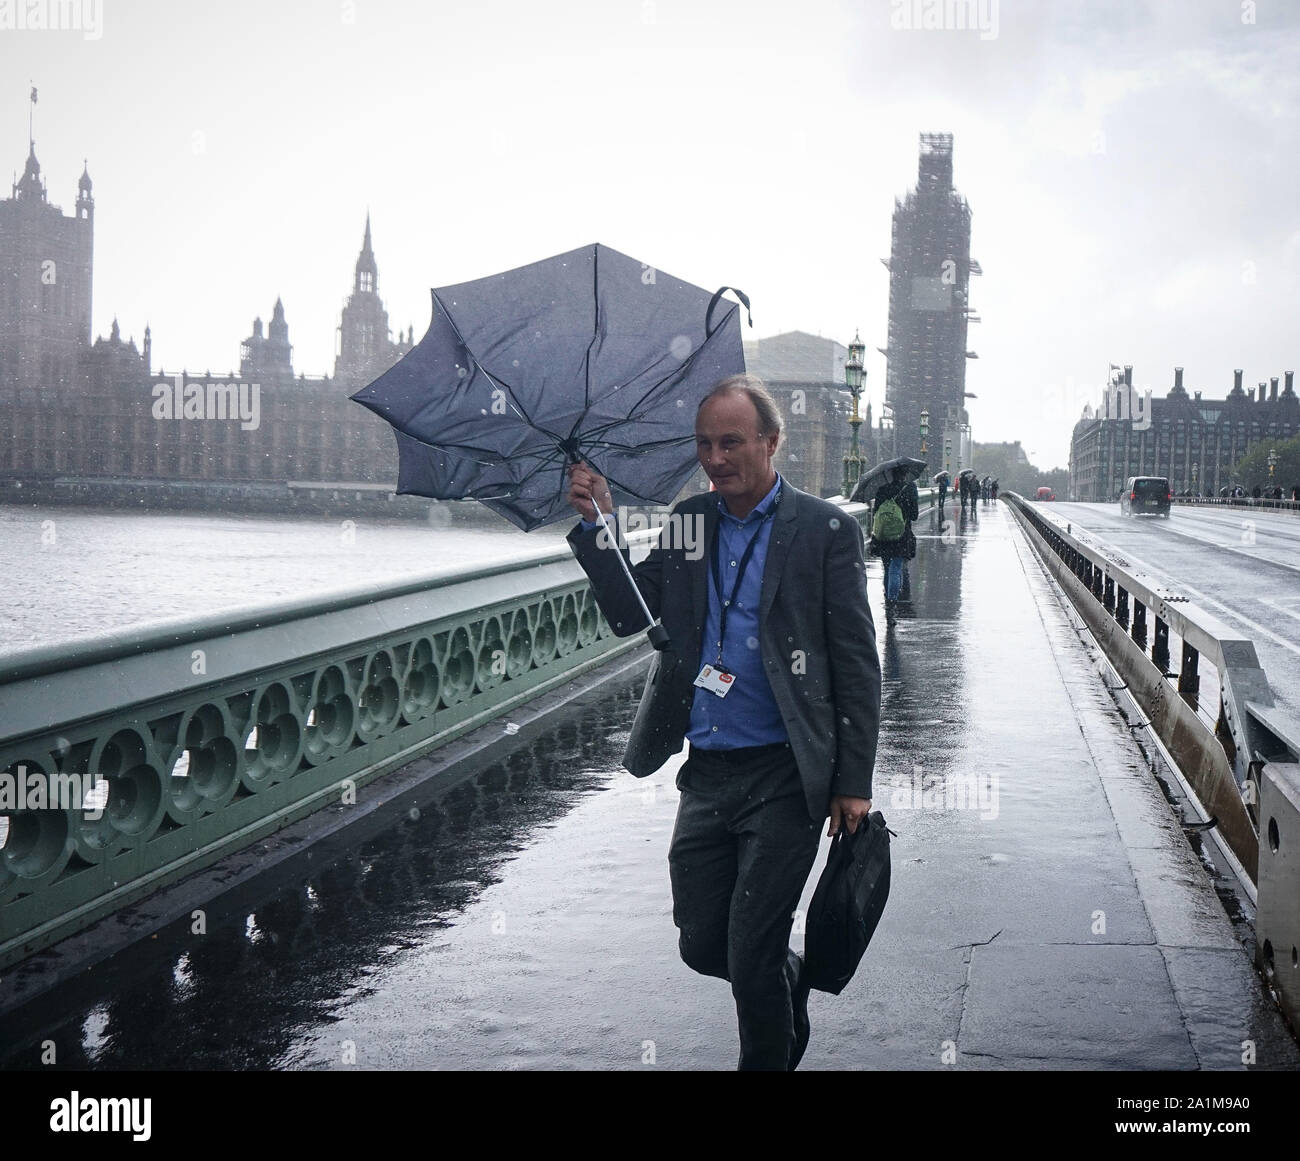 London, United Kingdom . 27th Sep, 2019. London, UK. 27 SEPTEMBER, UK WEATHER. Heavy rain broke out on Westminster Bridge this afternoon. Photo by (Ioannis Alexopolos/Alamy Live News). Stock Photo